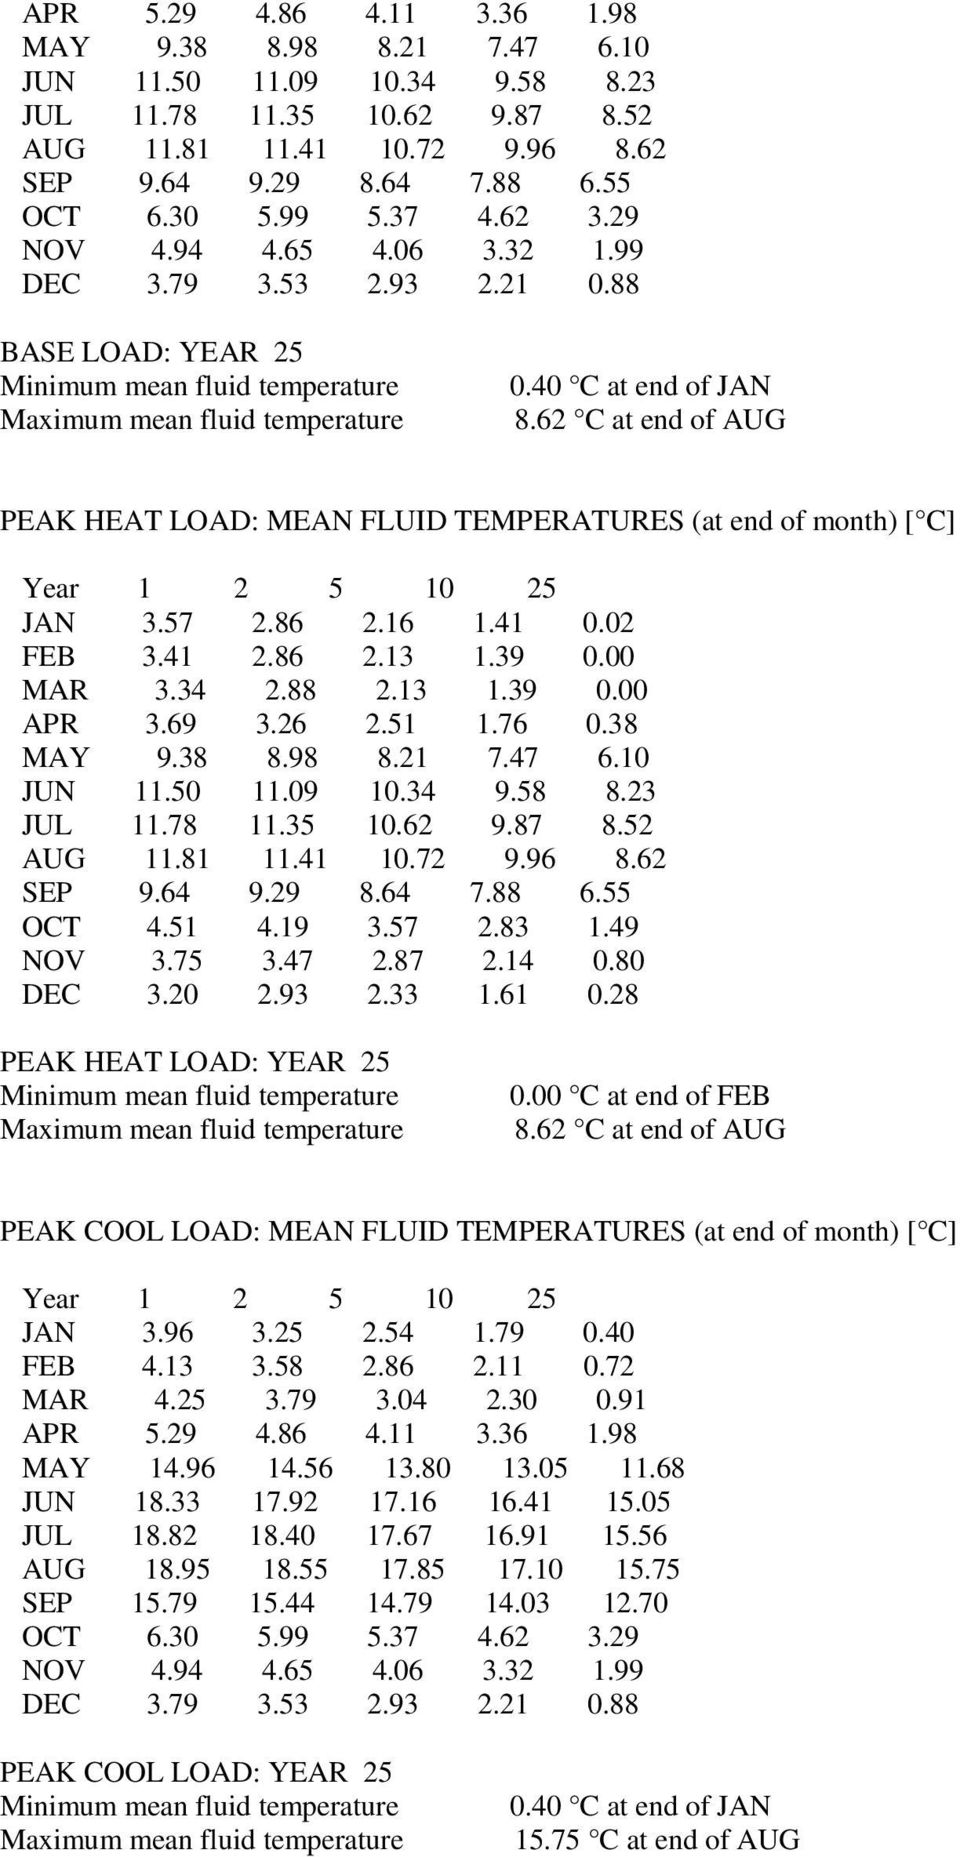 62 C at end of AUG PEAK HEAT LOAD: MEAN FLUID TEMPERATURES (at end of month) [ C] Year 1 2 5 10 25 JAN 3.57 2.86 2.16 1.41 0.02 FEB 3.41 2.86 2.13 1.39 0.00 MAR 3.34 2.88 2.13 1.39 0.00 APR 3.69 3.